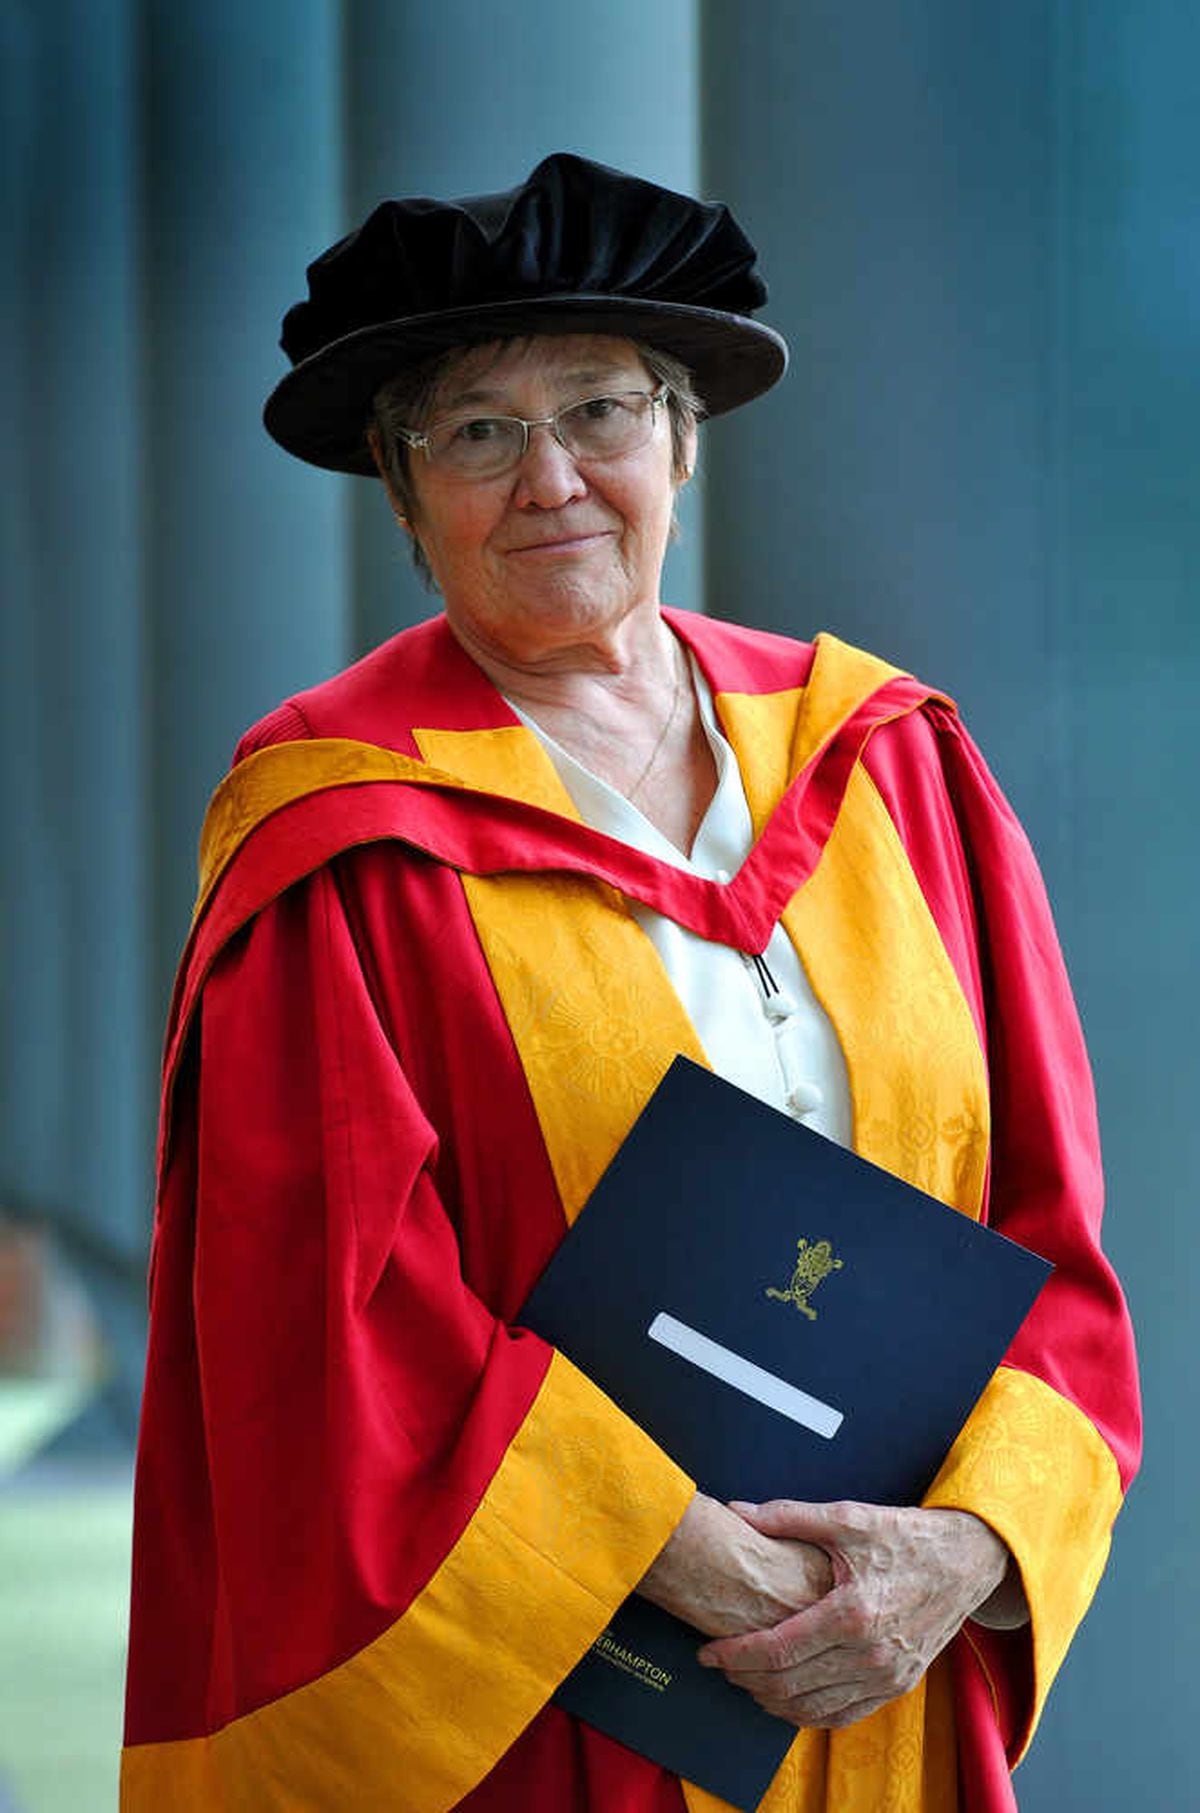 Clare Short at the University of Wolverhampton